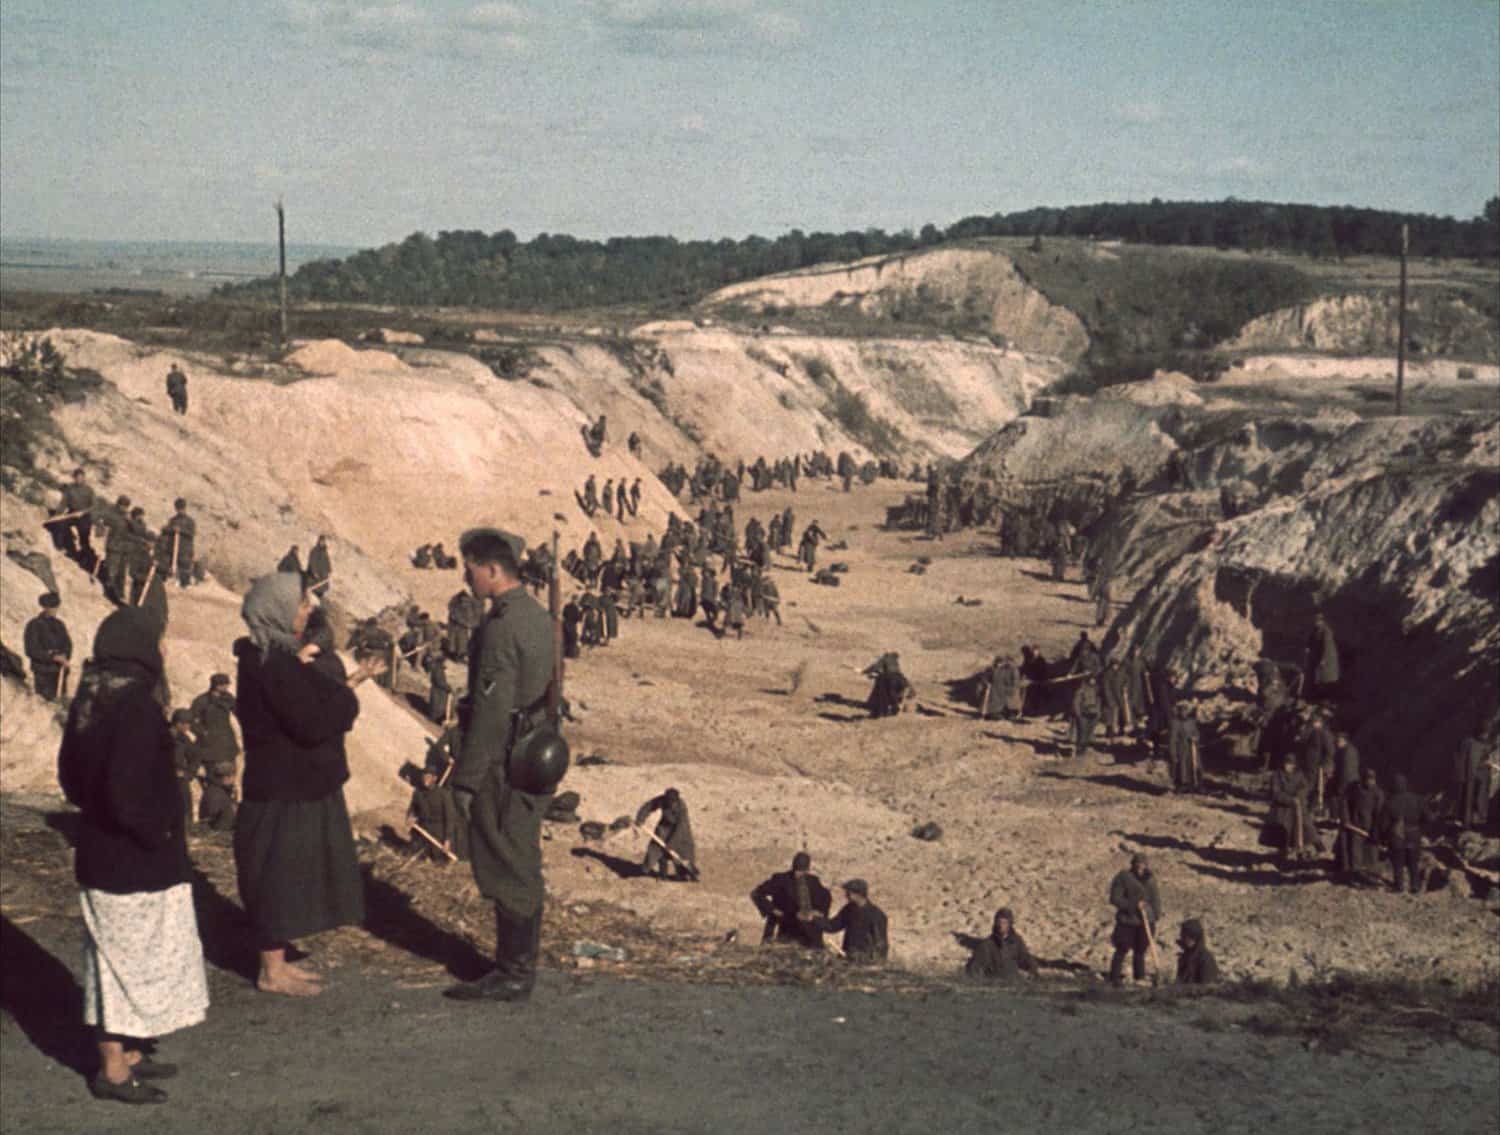 Soviet POWs covering a mass grave after the Babi Yar massacre, October 1, 1941. Credit: Johannes Hähle, Wikimedia Commons